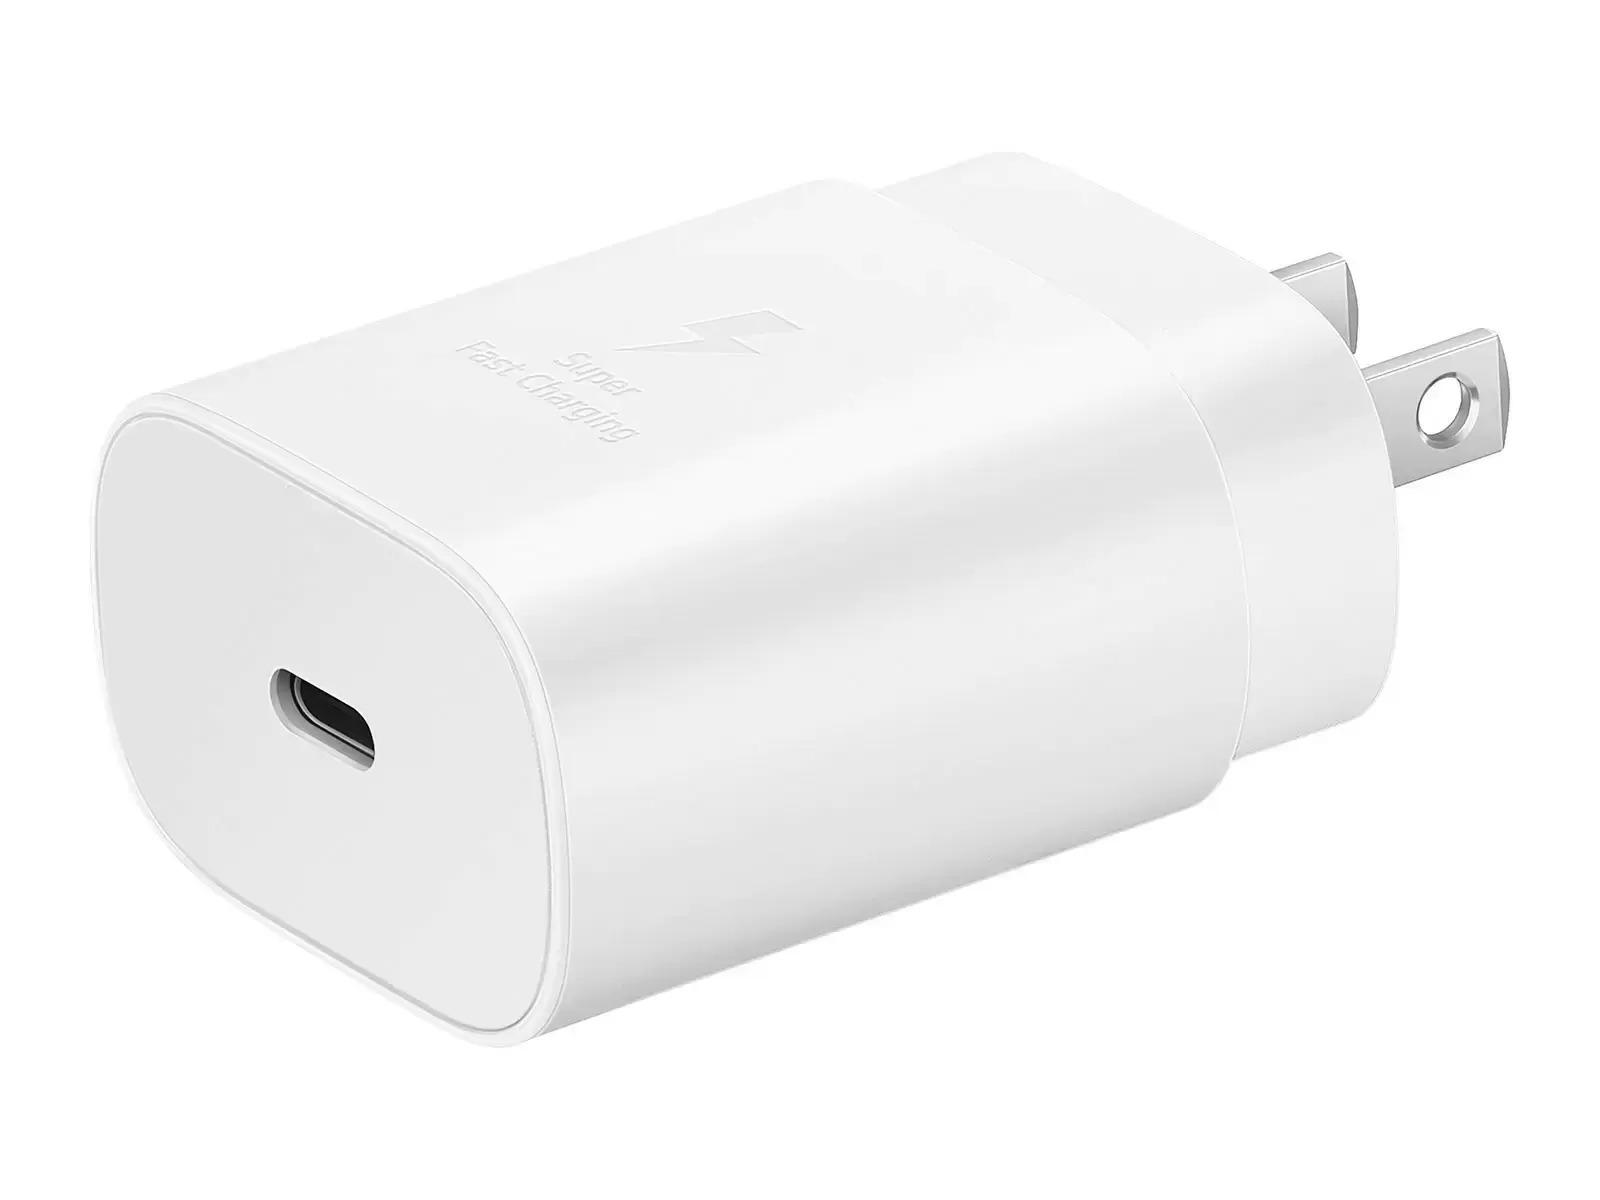 Samsung 25W Super Fast Wall Charger for $7.99